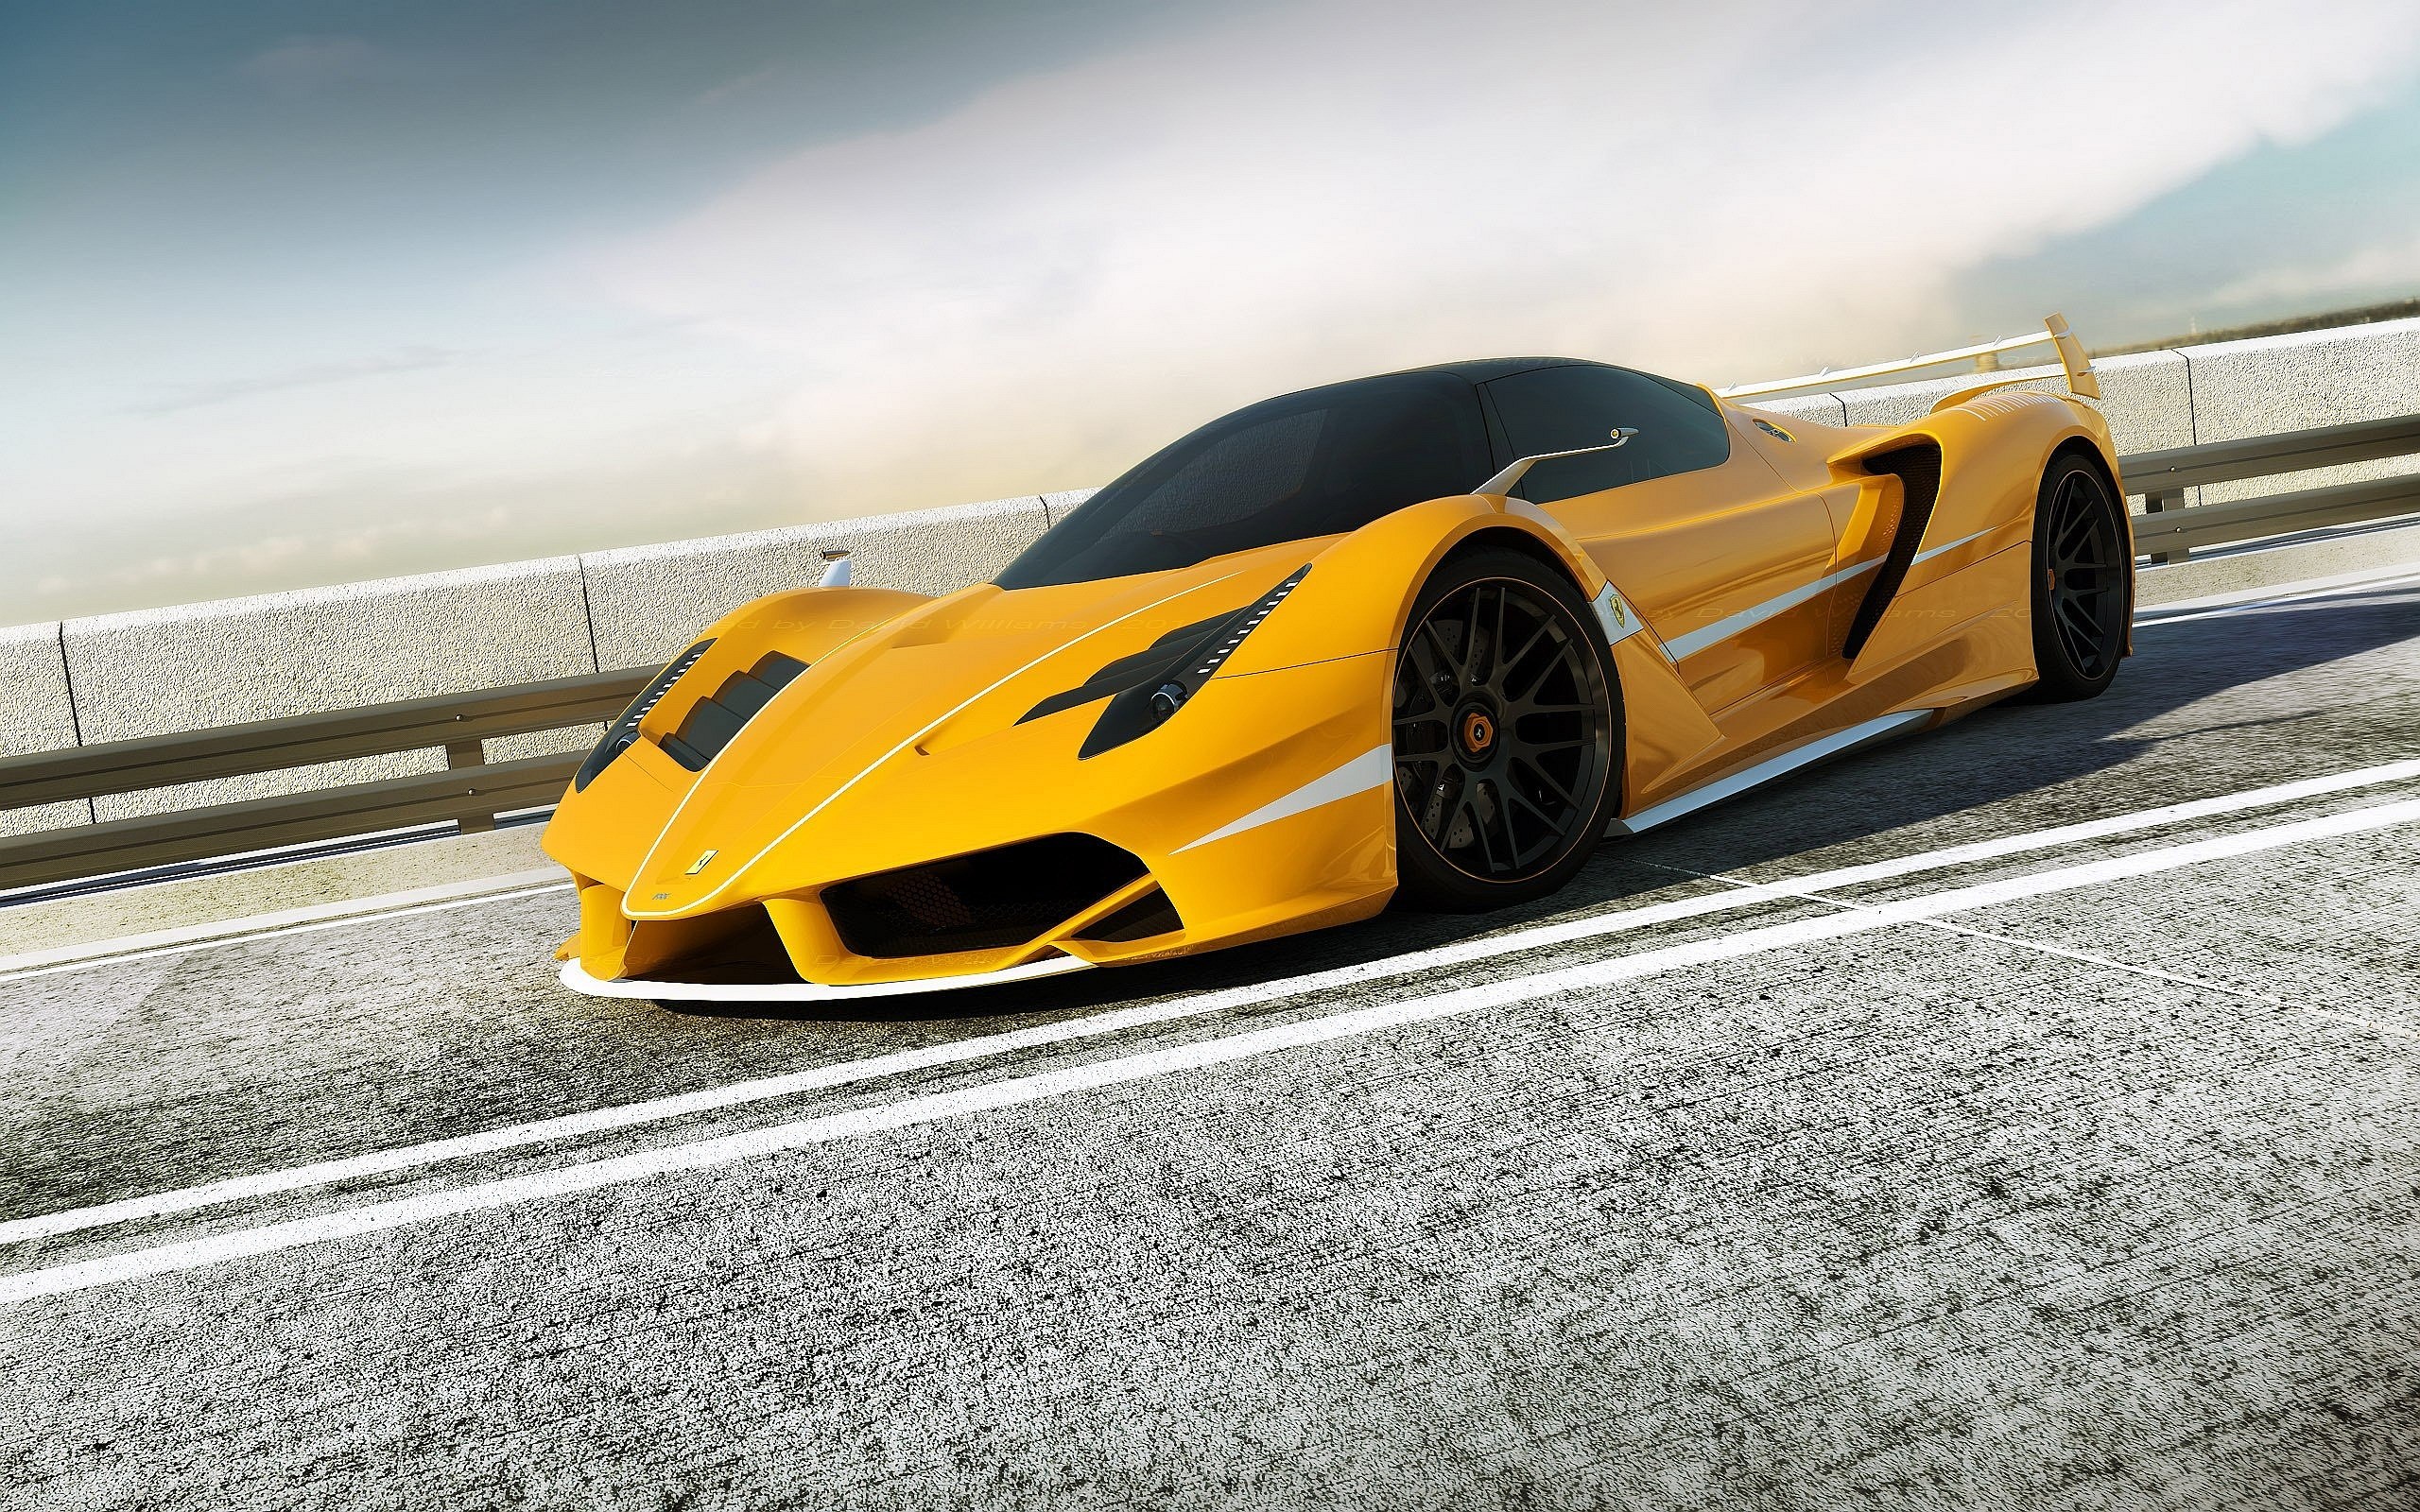 Awesome Yellow Ferrari F70 HD Wallpaper Picture Free Download